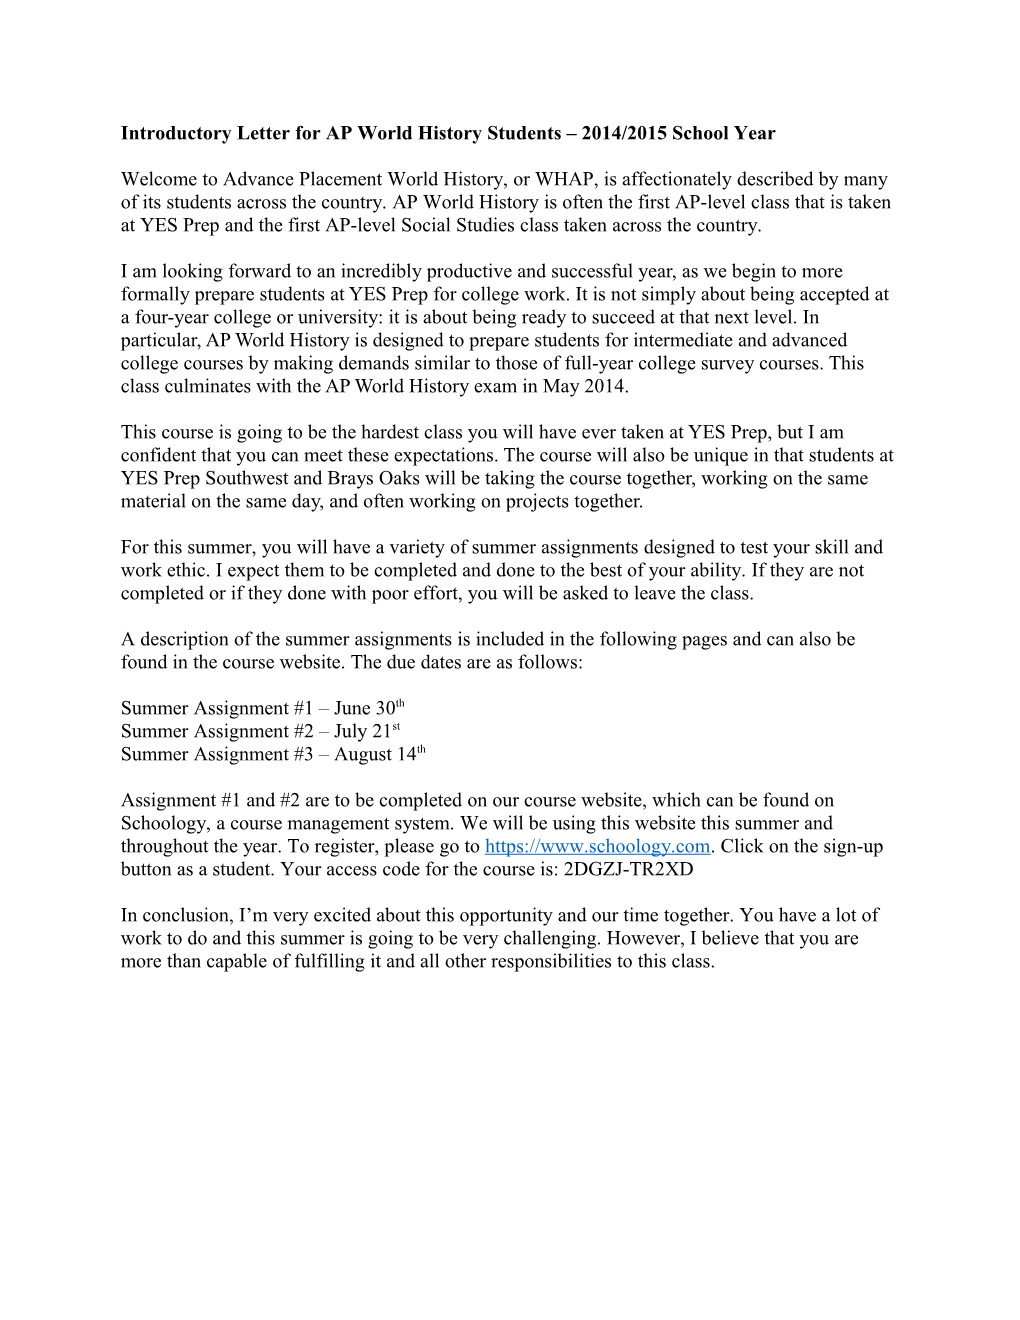 Introductory Letter for AP World History Students 2014/2015 School Year